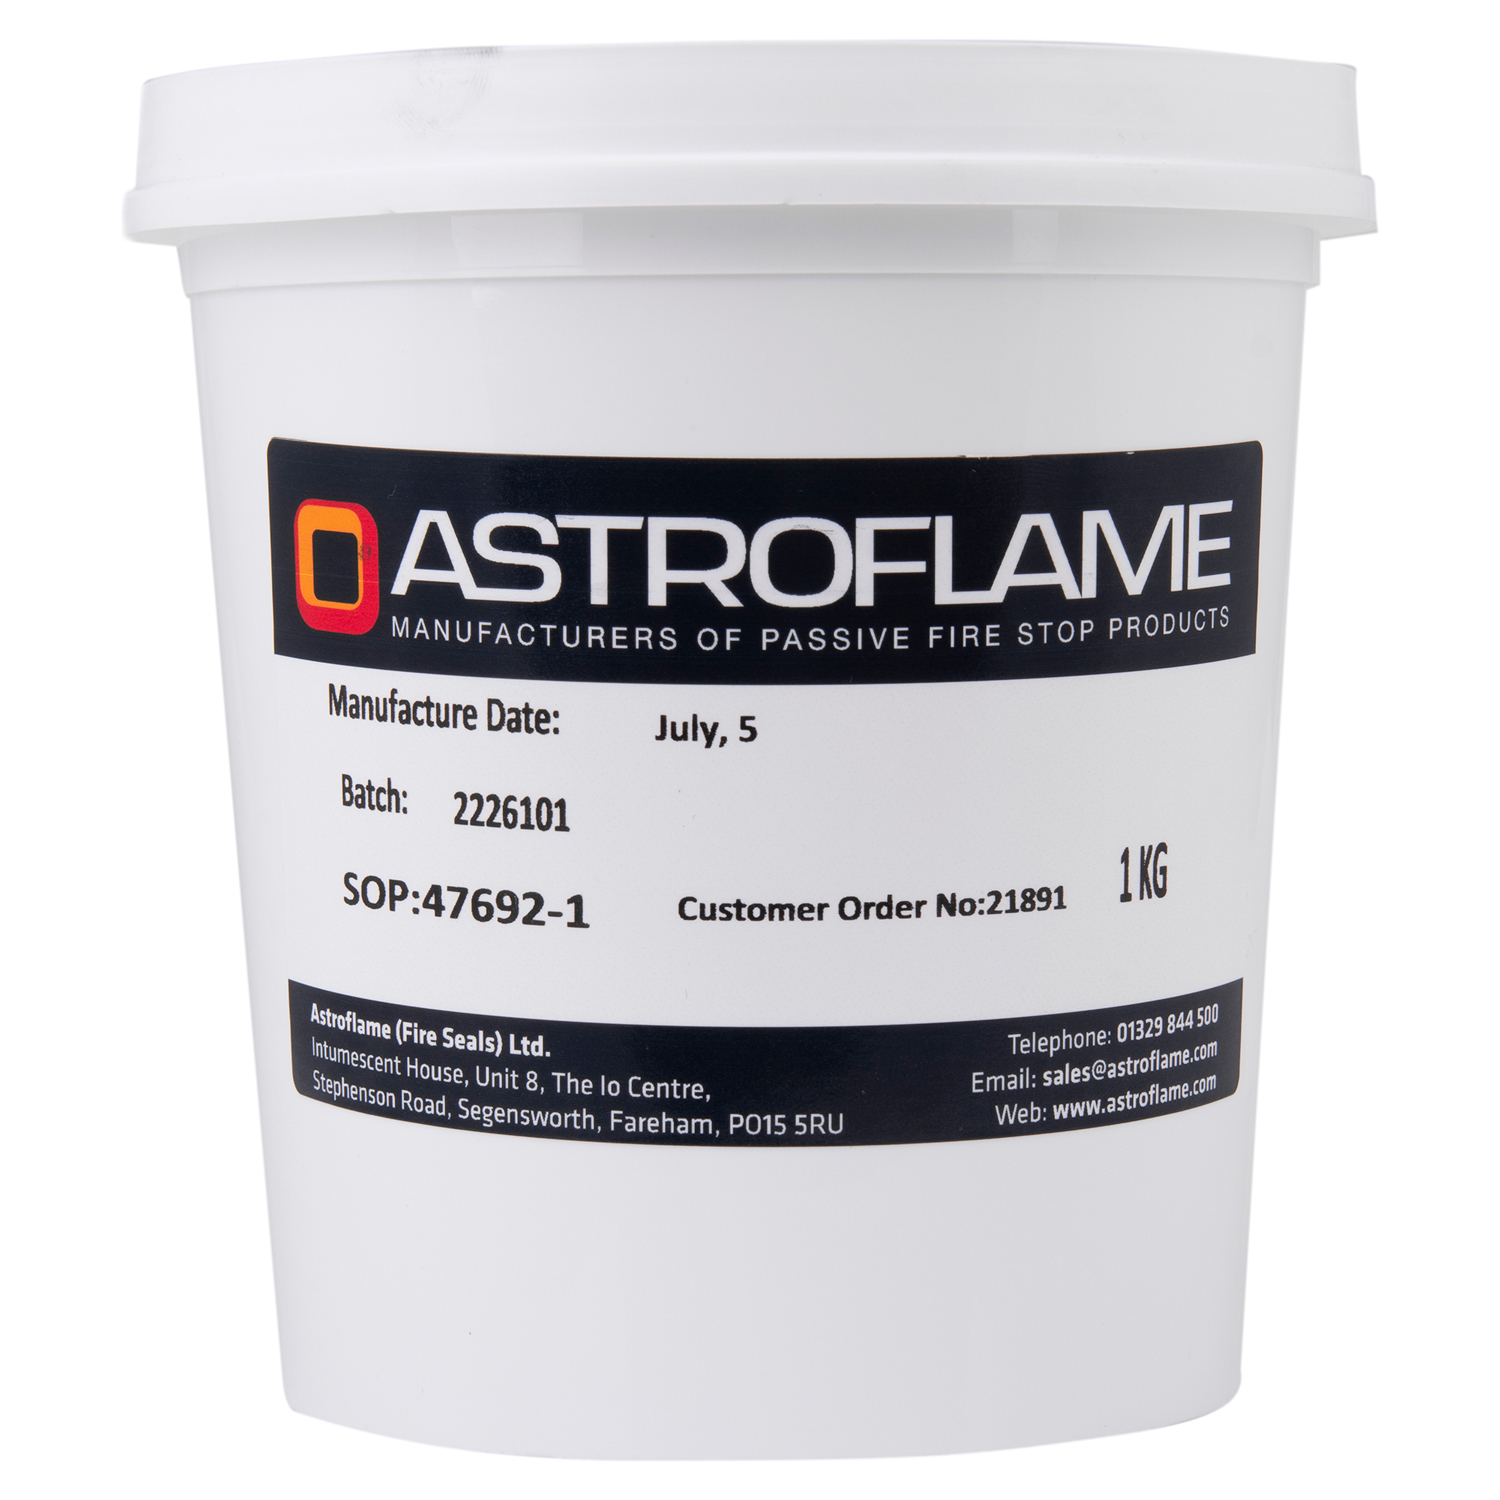 Astroflame Fire Resistant Putty